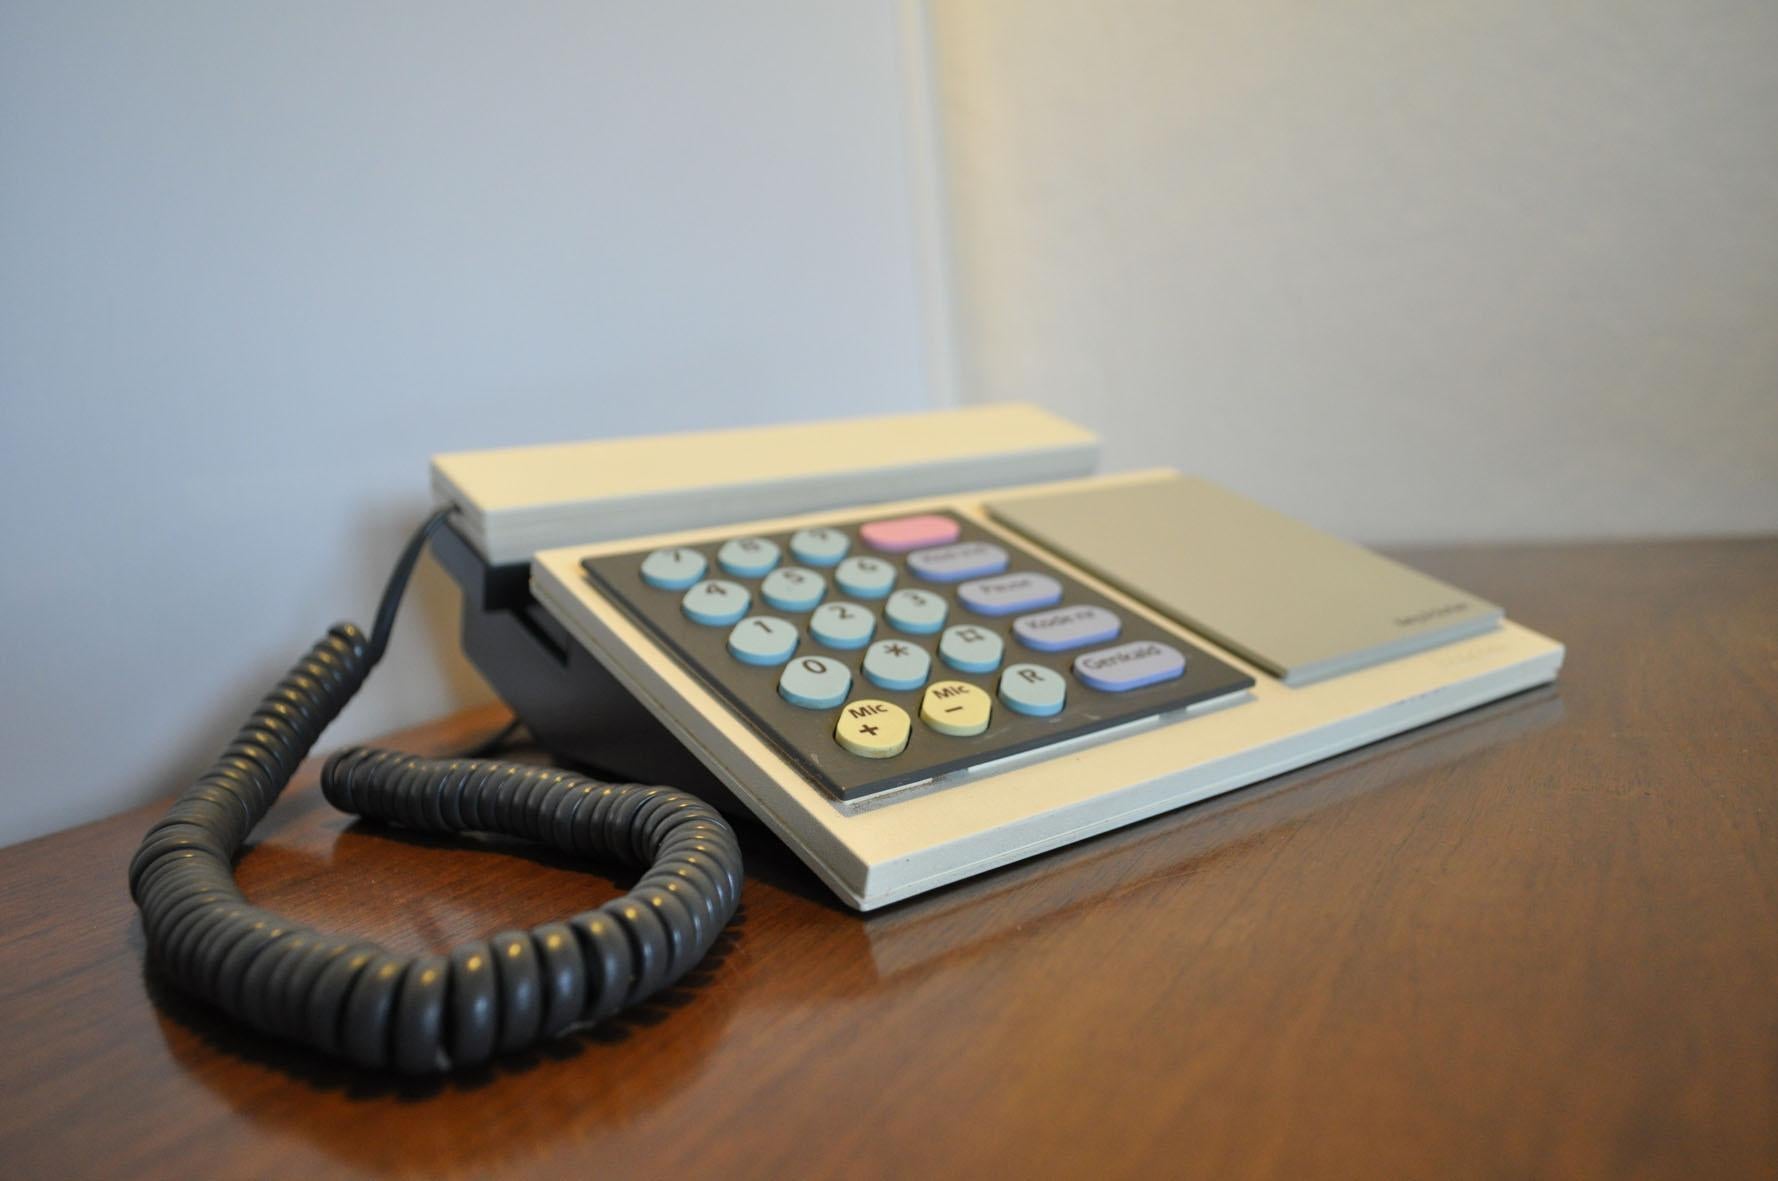 Danish Iconic Beocom 1000 Telephone from 1986 by Bang & Olusfen